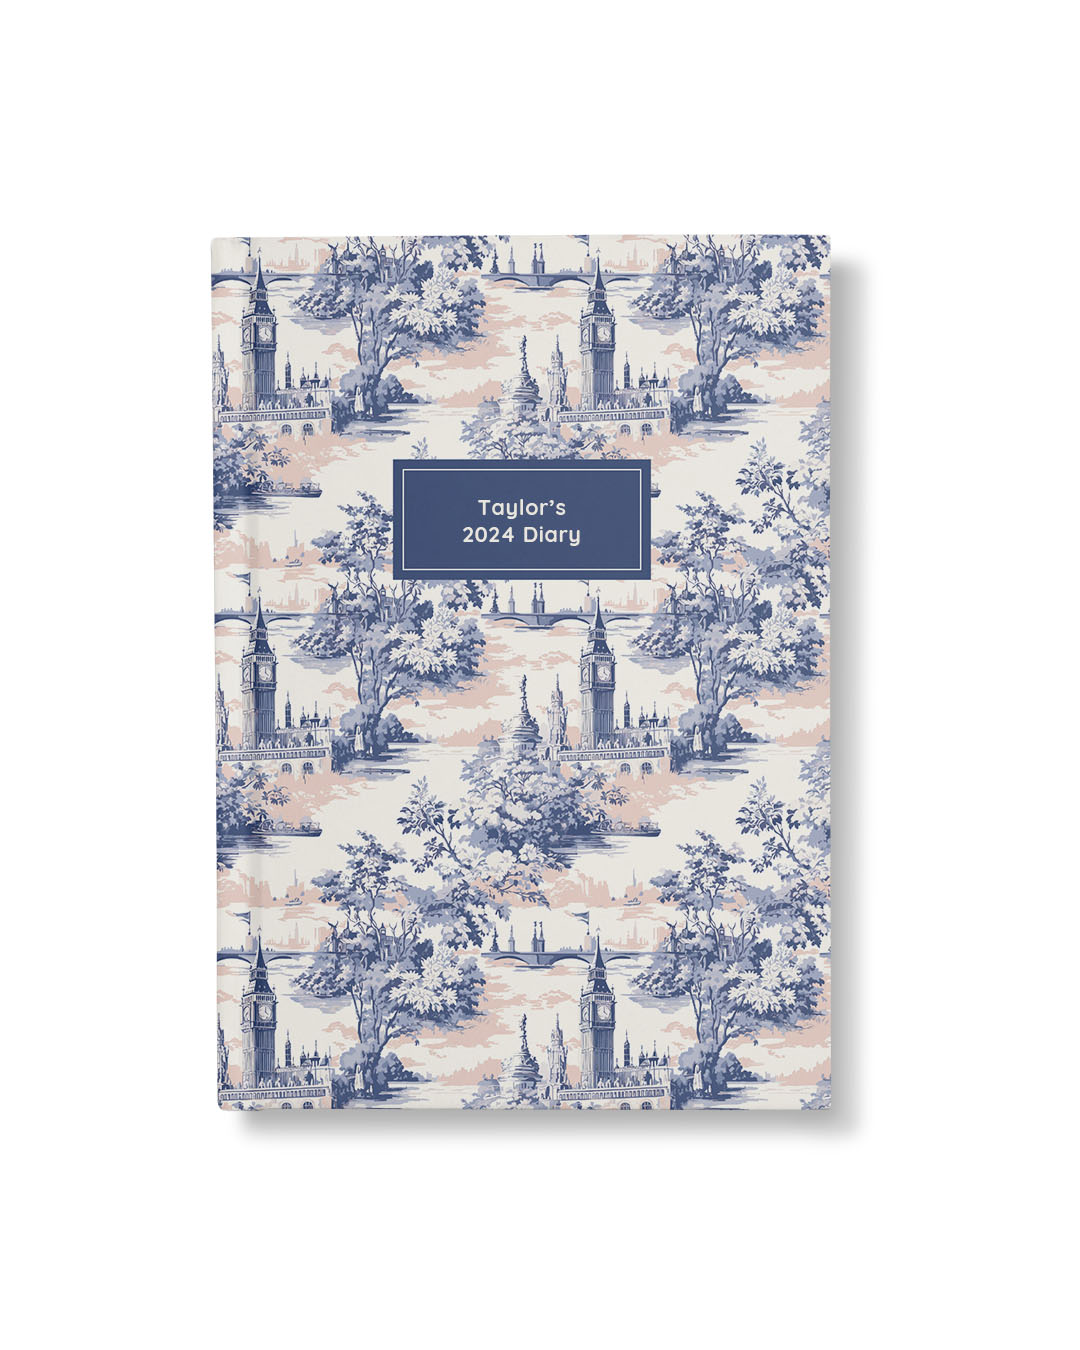 Ohh Deer Personalised Diary | A5 Hardback 2024 Planner | To Do Lists, Calendars & Goals | Daily & Monthly Views | Add Your Name | London’s Calling